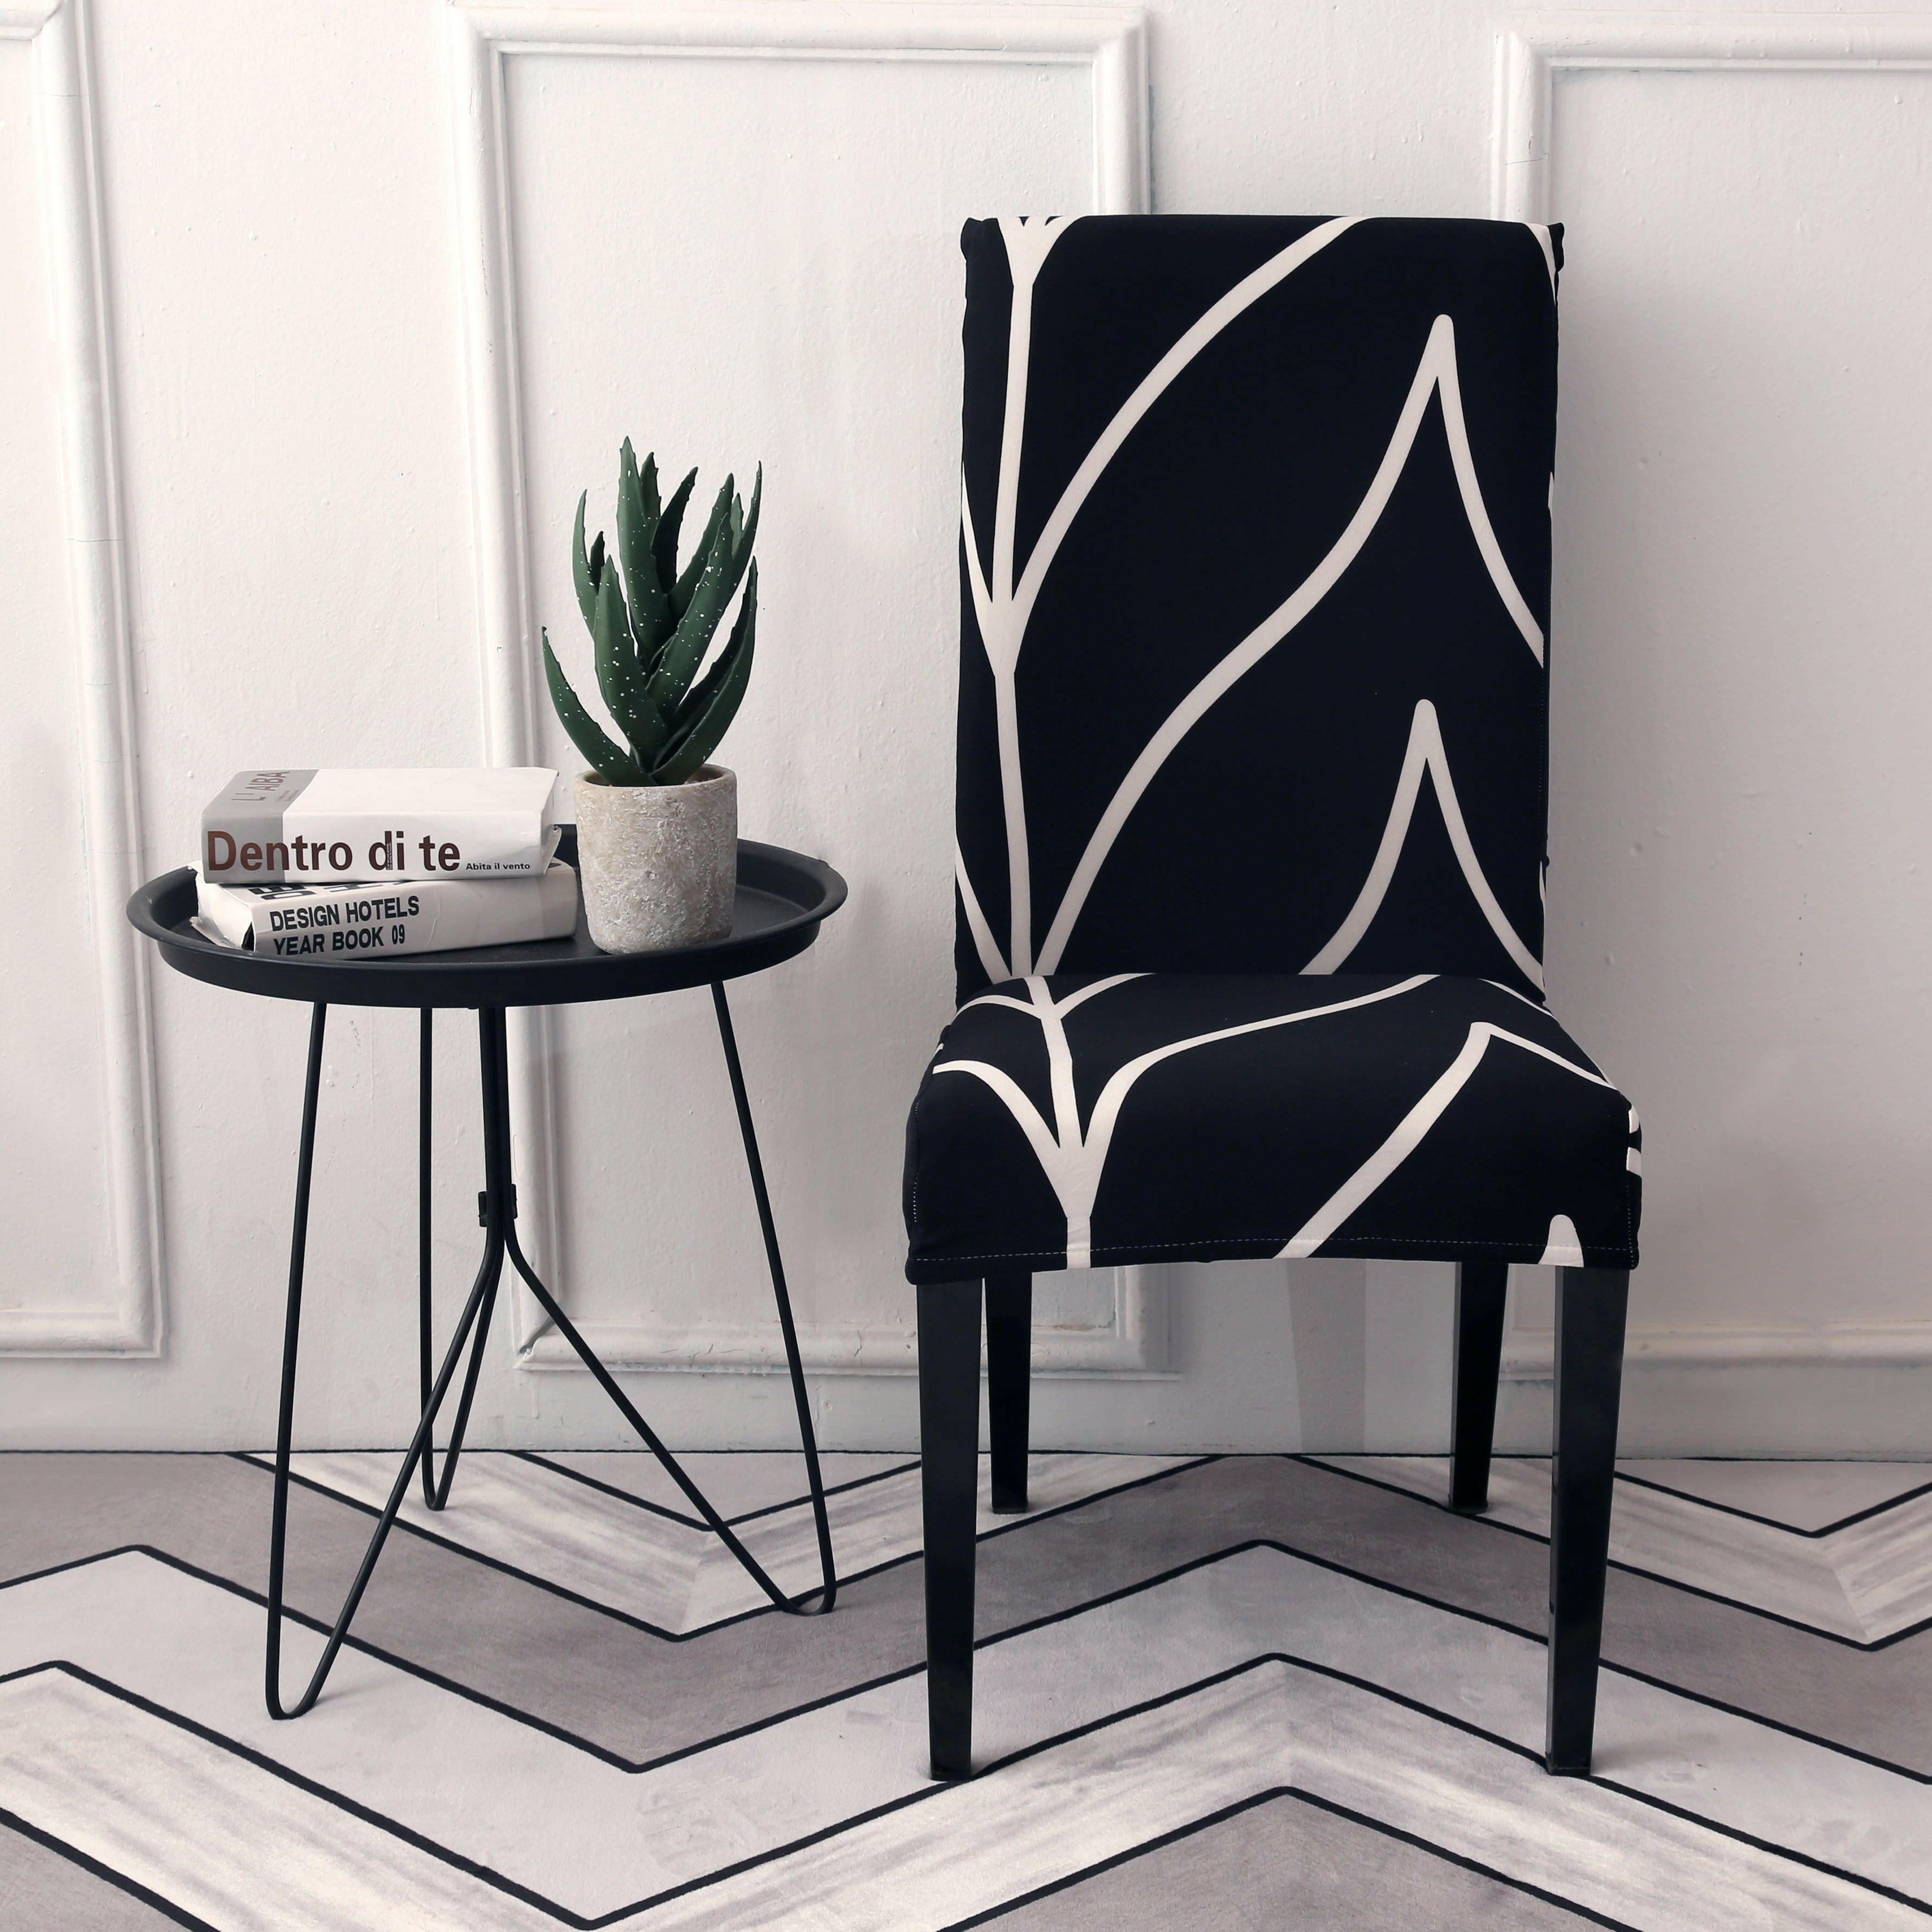 Hyper Cover Stretch Dining Chair Covers with Patterns Black Tone | Chair Covers | Brilliant Home Living